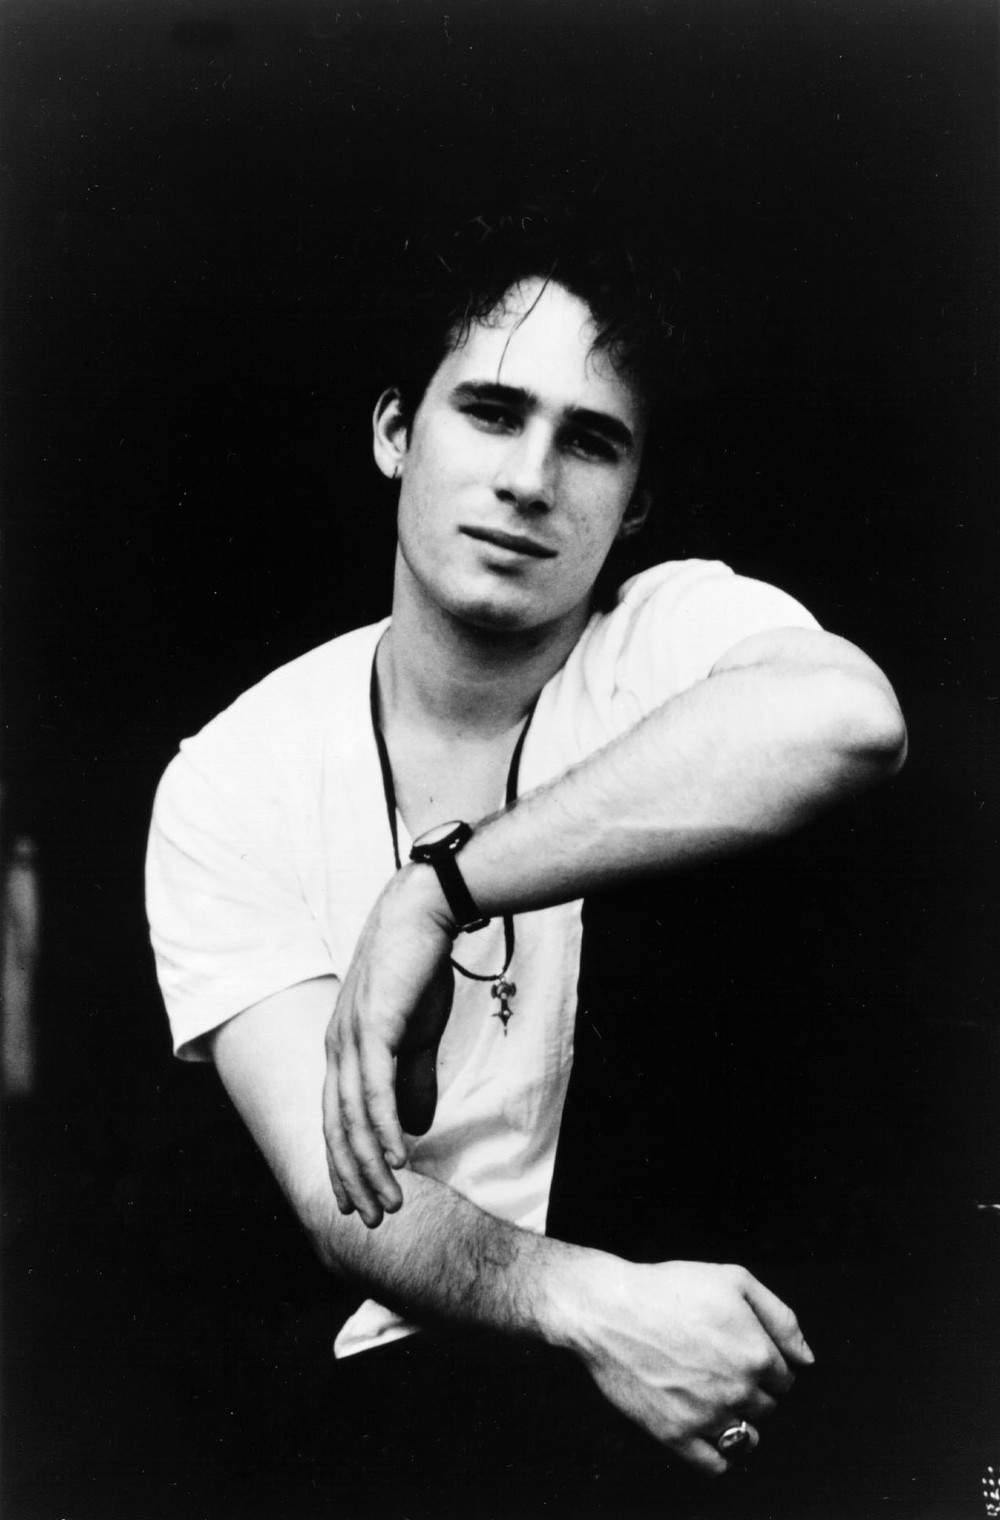 Jeff Buckley Tickets And Tour Dates